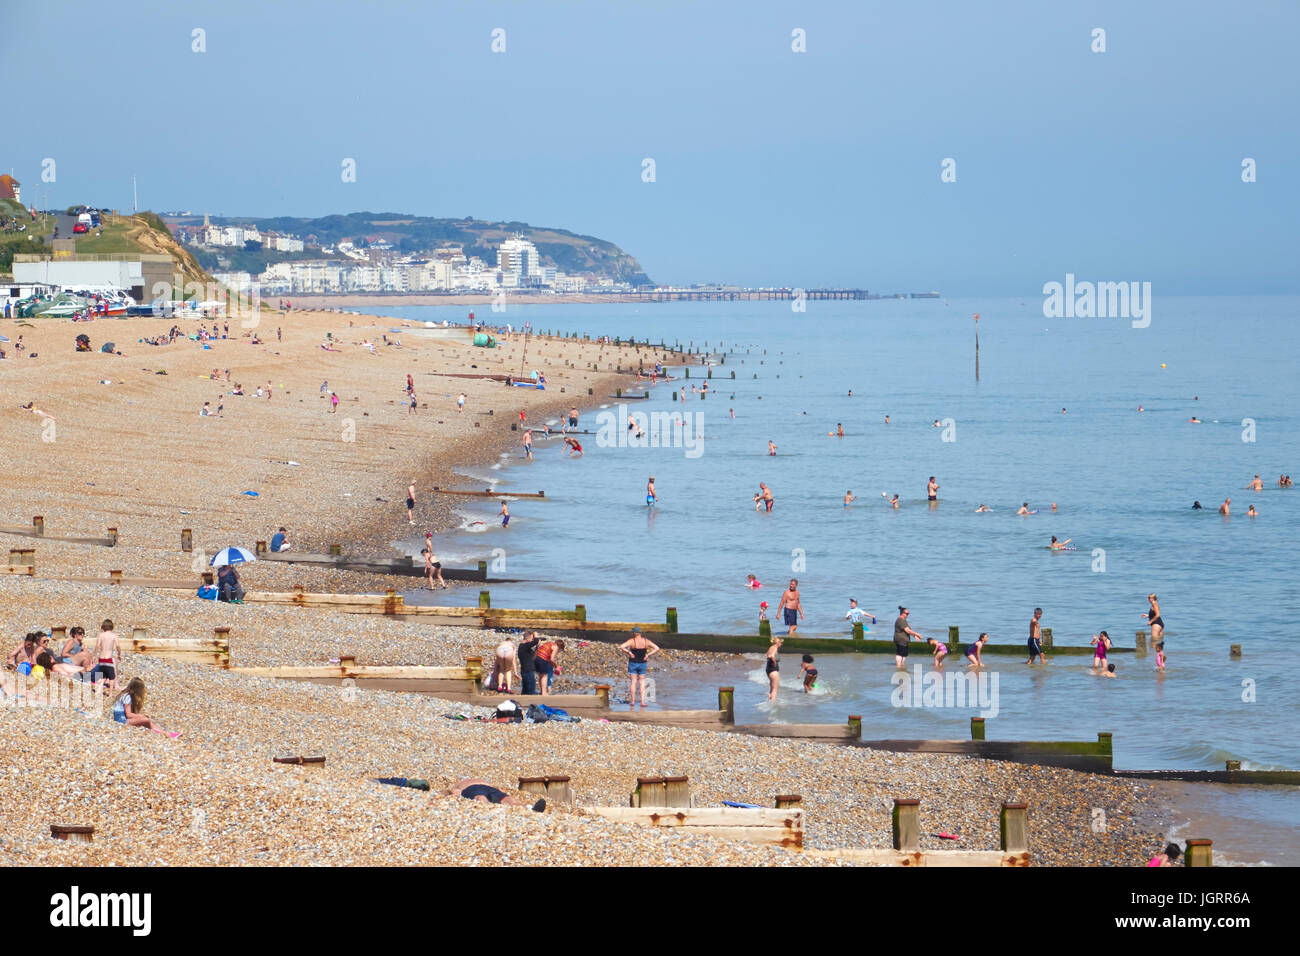 Bexhill-0n-Sea beach, East Sussex, England, UK Stock Photo